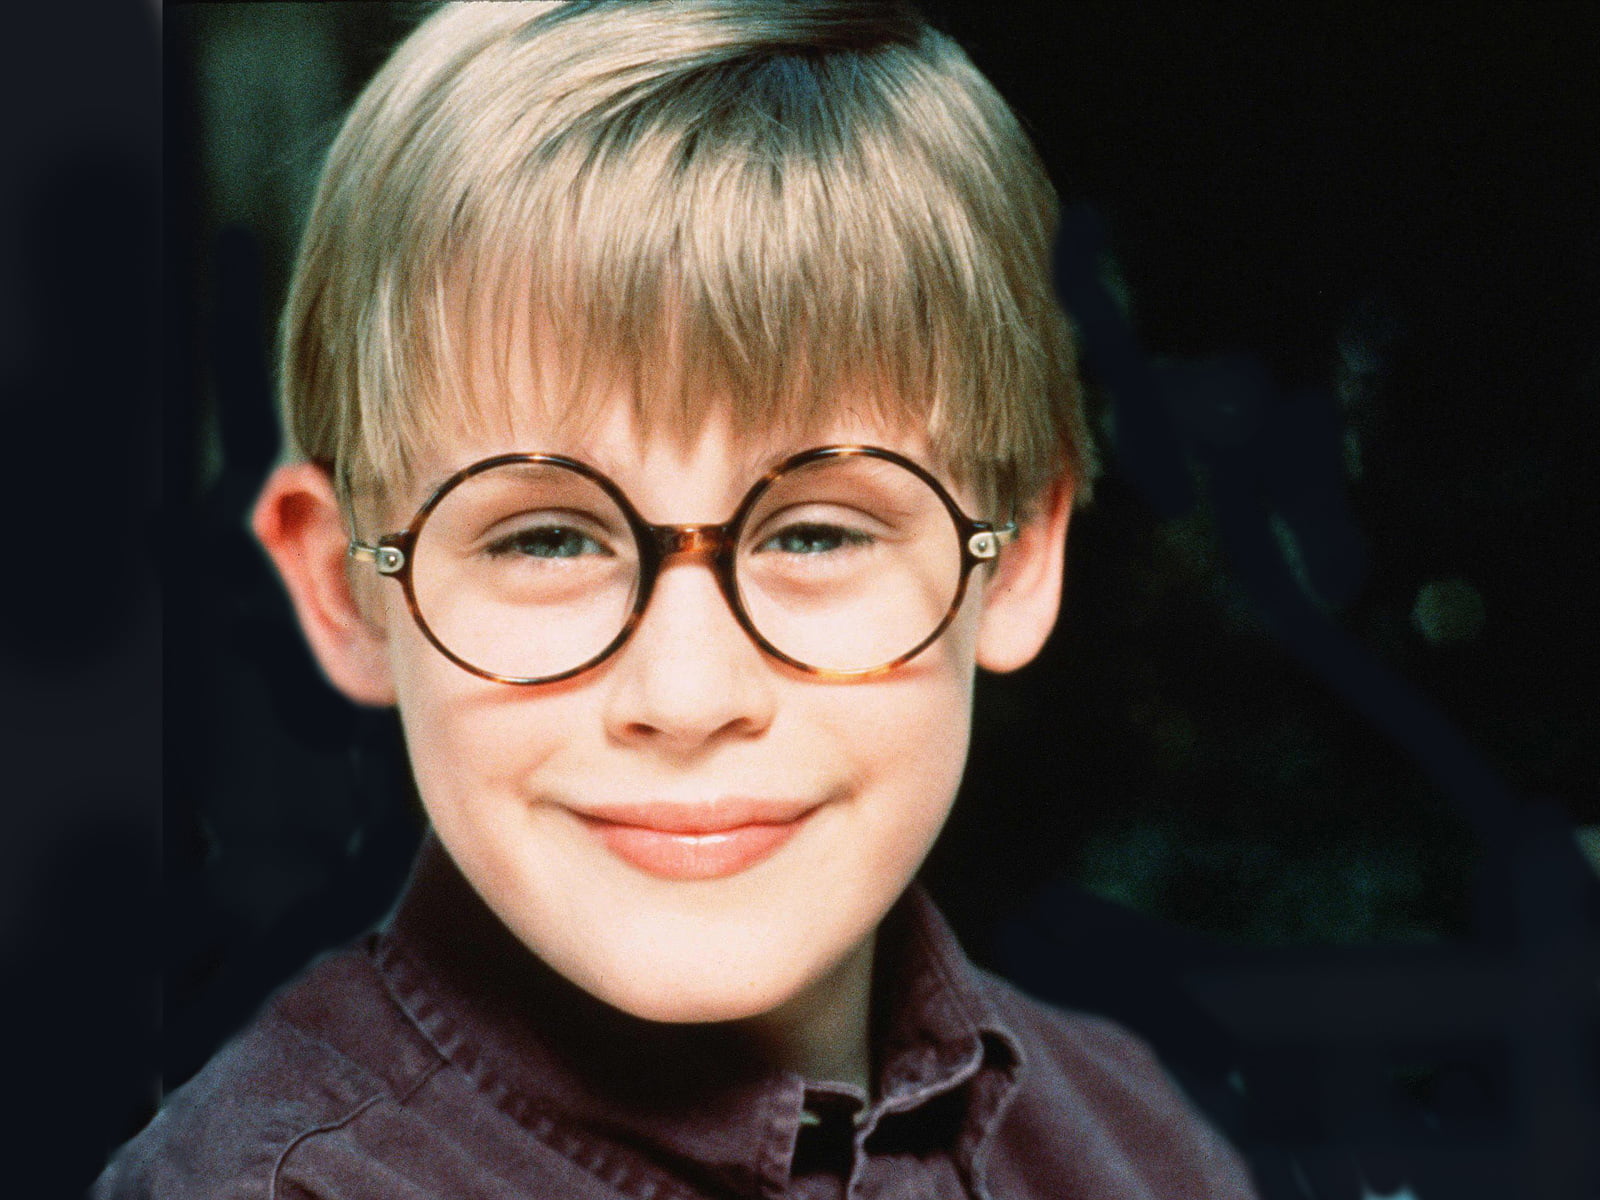 Home Alone With Glasses - HD Wallpaper 